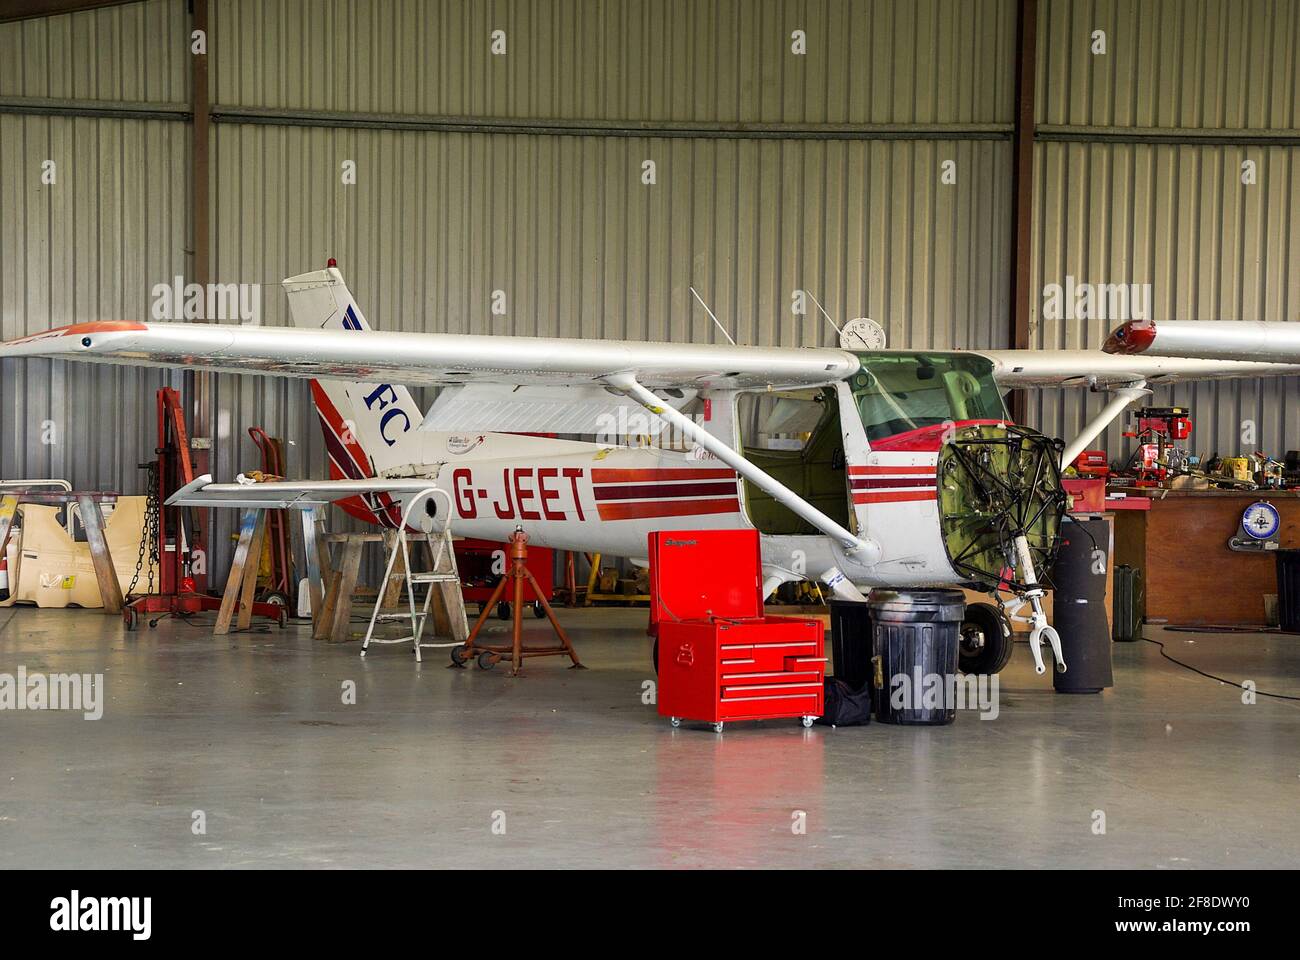 Cessna 152 Aerobat light aircraft G-JEET stripped down for servicing. Heavy maintenance with engine removed. Toolbox Stock Photo